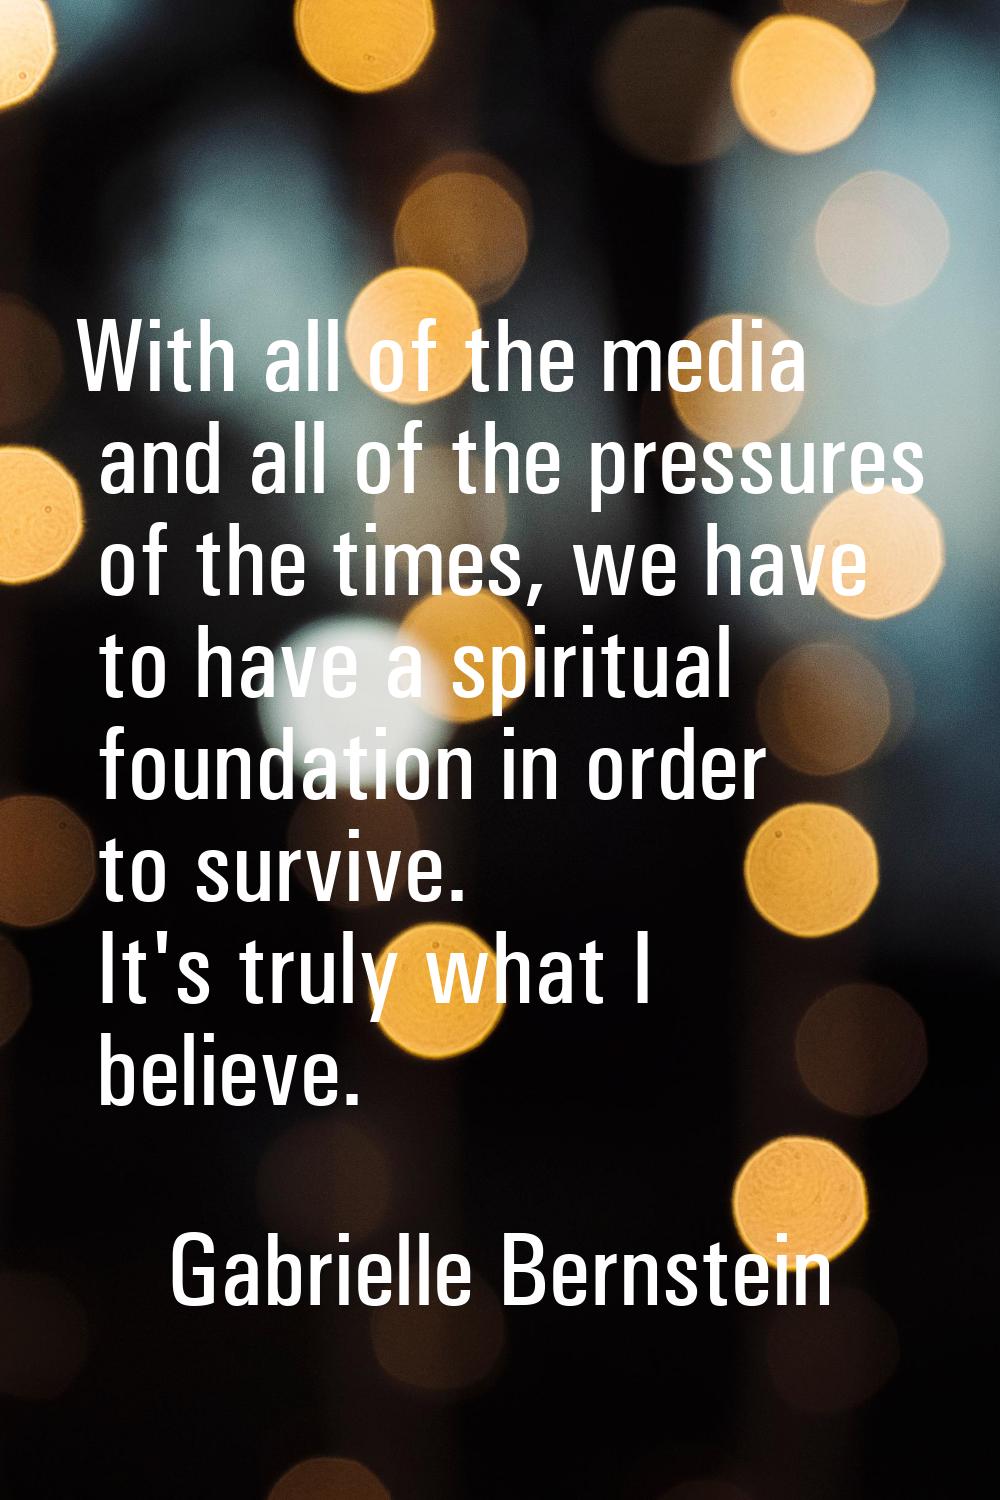 With all of the media and all of the pressures of the times, we have to have a spiritual foundation